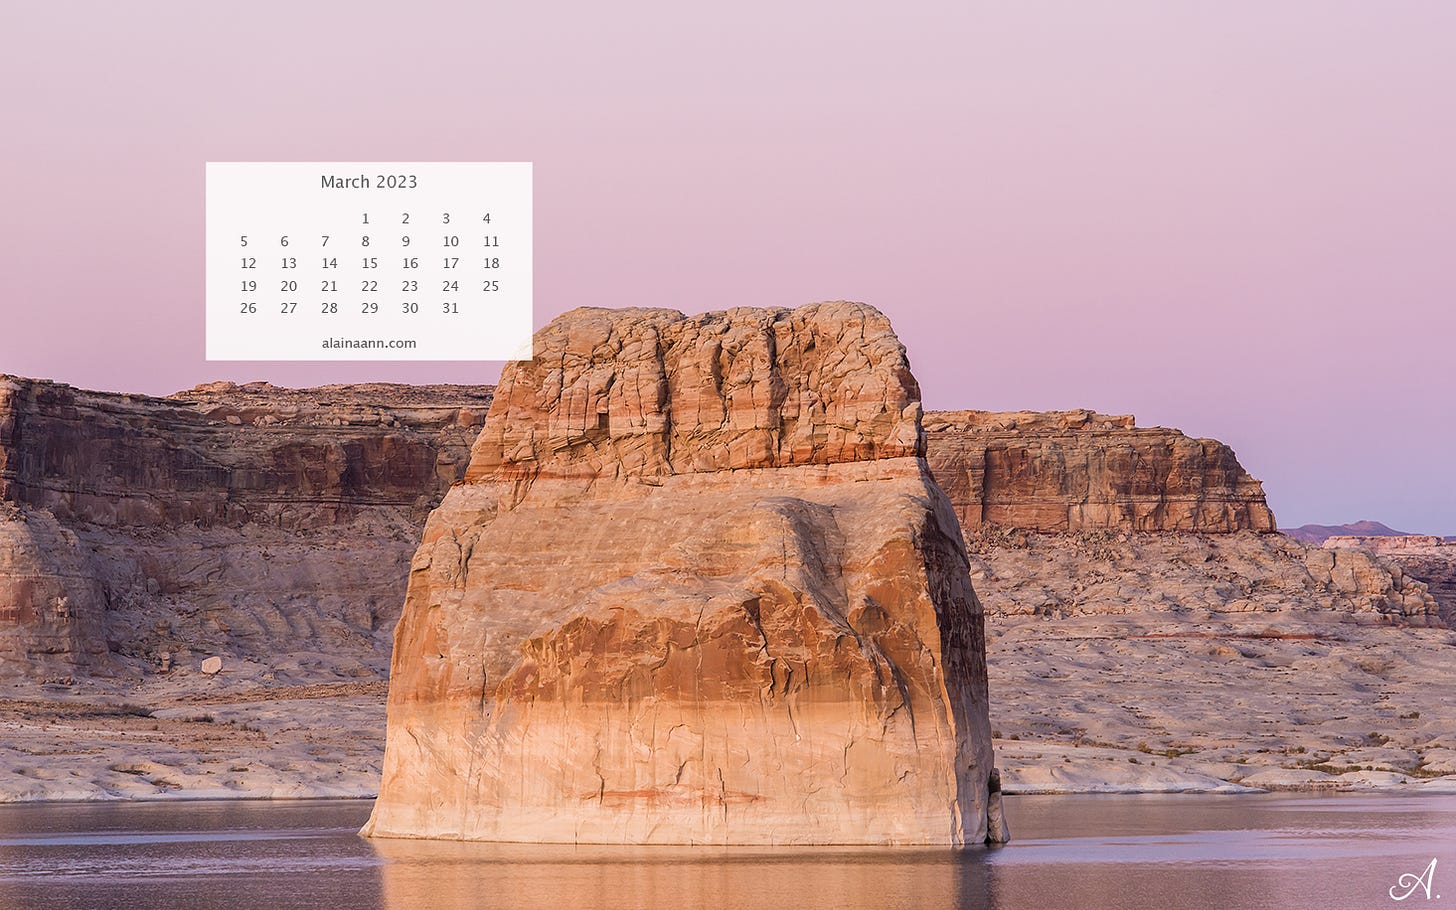 Large rock formation surrounded by still water at sunset. The sky is pastel pink and purple.